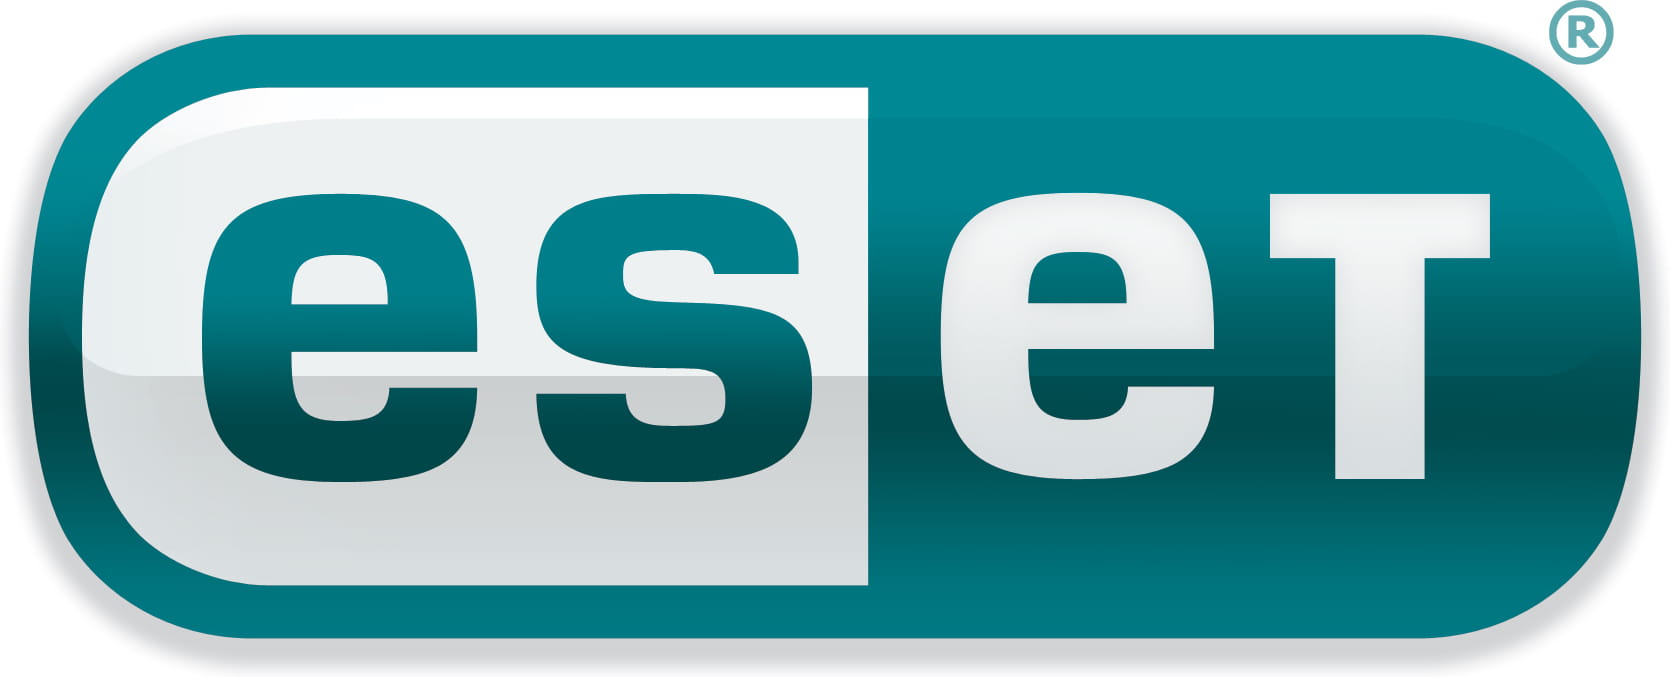 ESET NOD32 Small Business Pack renewal for 20 users KEY